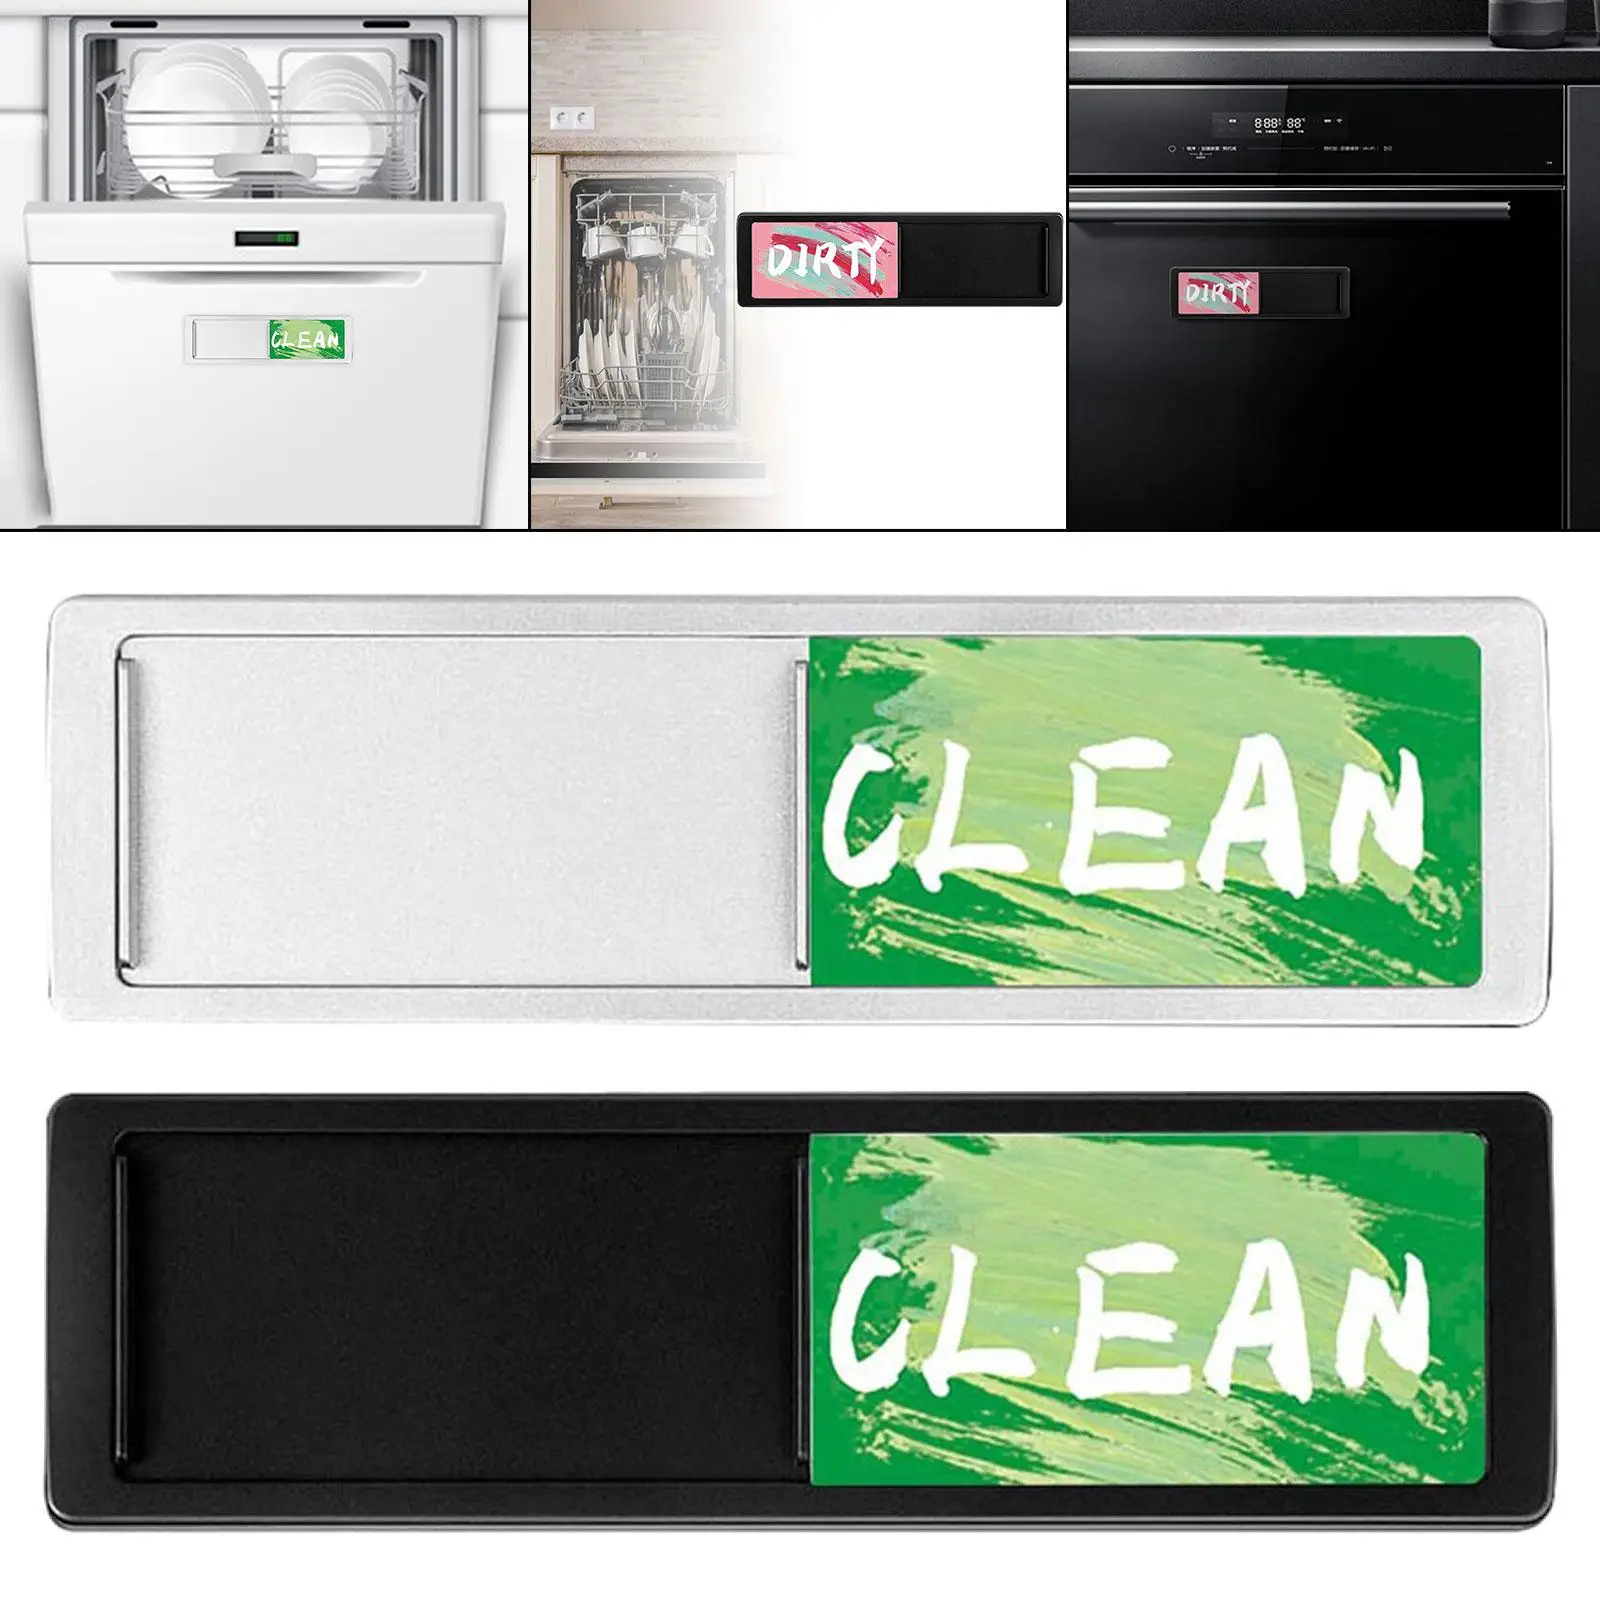 Double Sided Dishwasher Clean Dirty Sign Indicator Durable Dishwasher Cleaning Indicator for Fridge Laundry Washing Machine